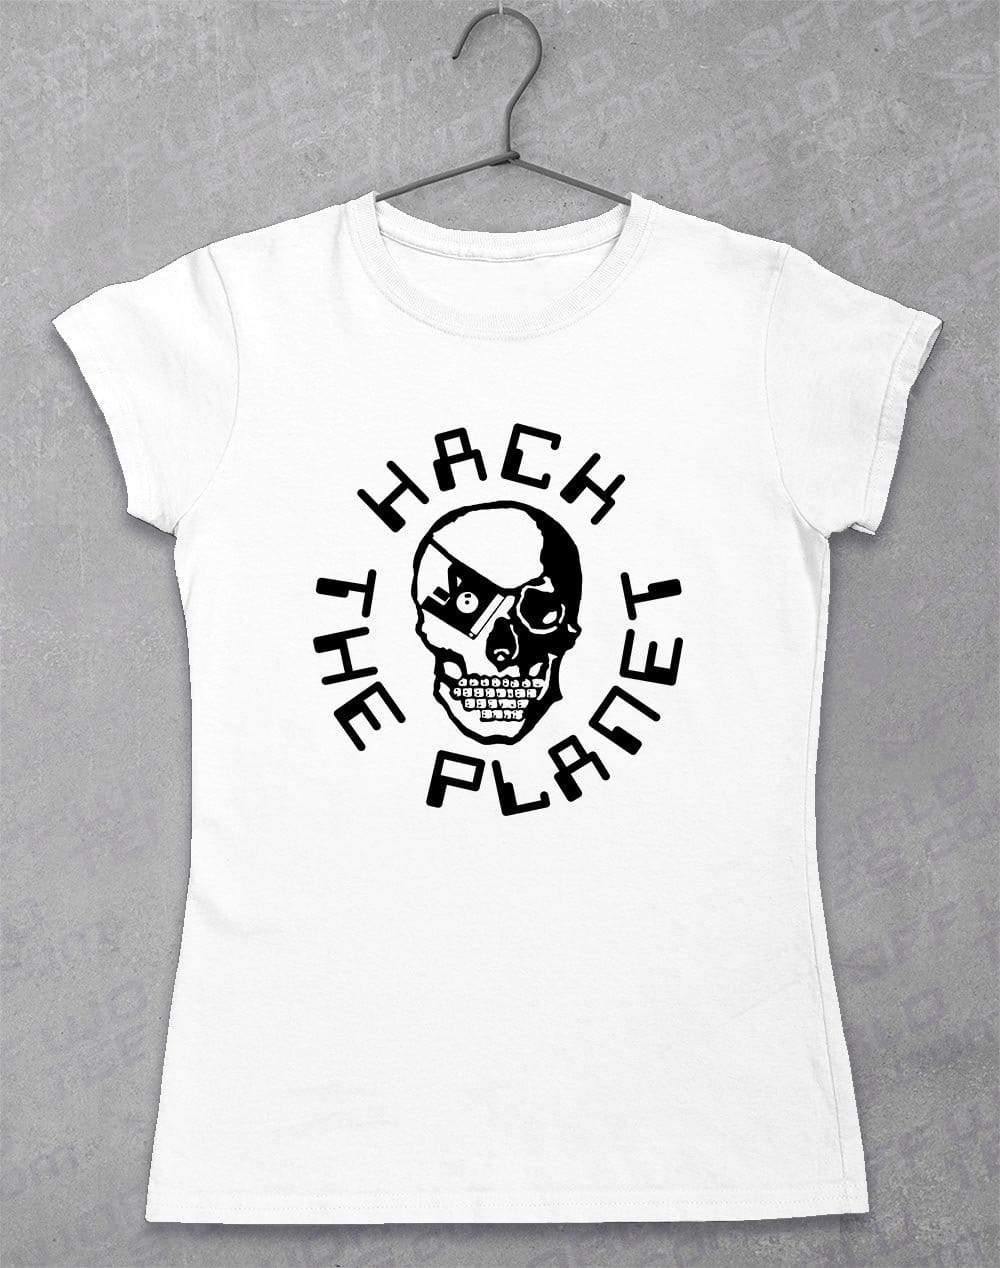 Hack the Planet - Women's T-Shirt 8-10 / White  - Off World Tees